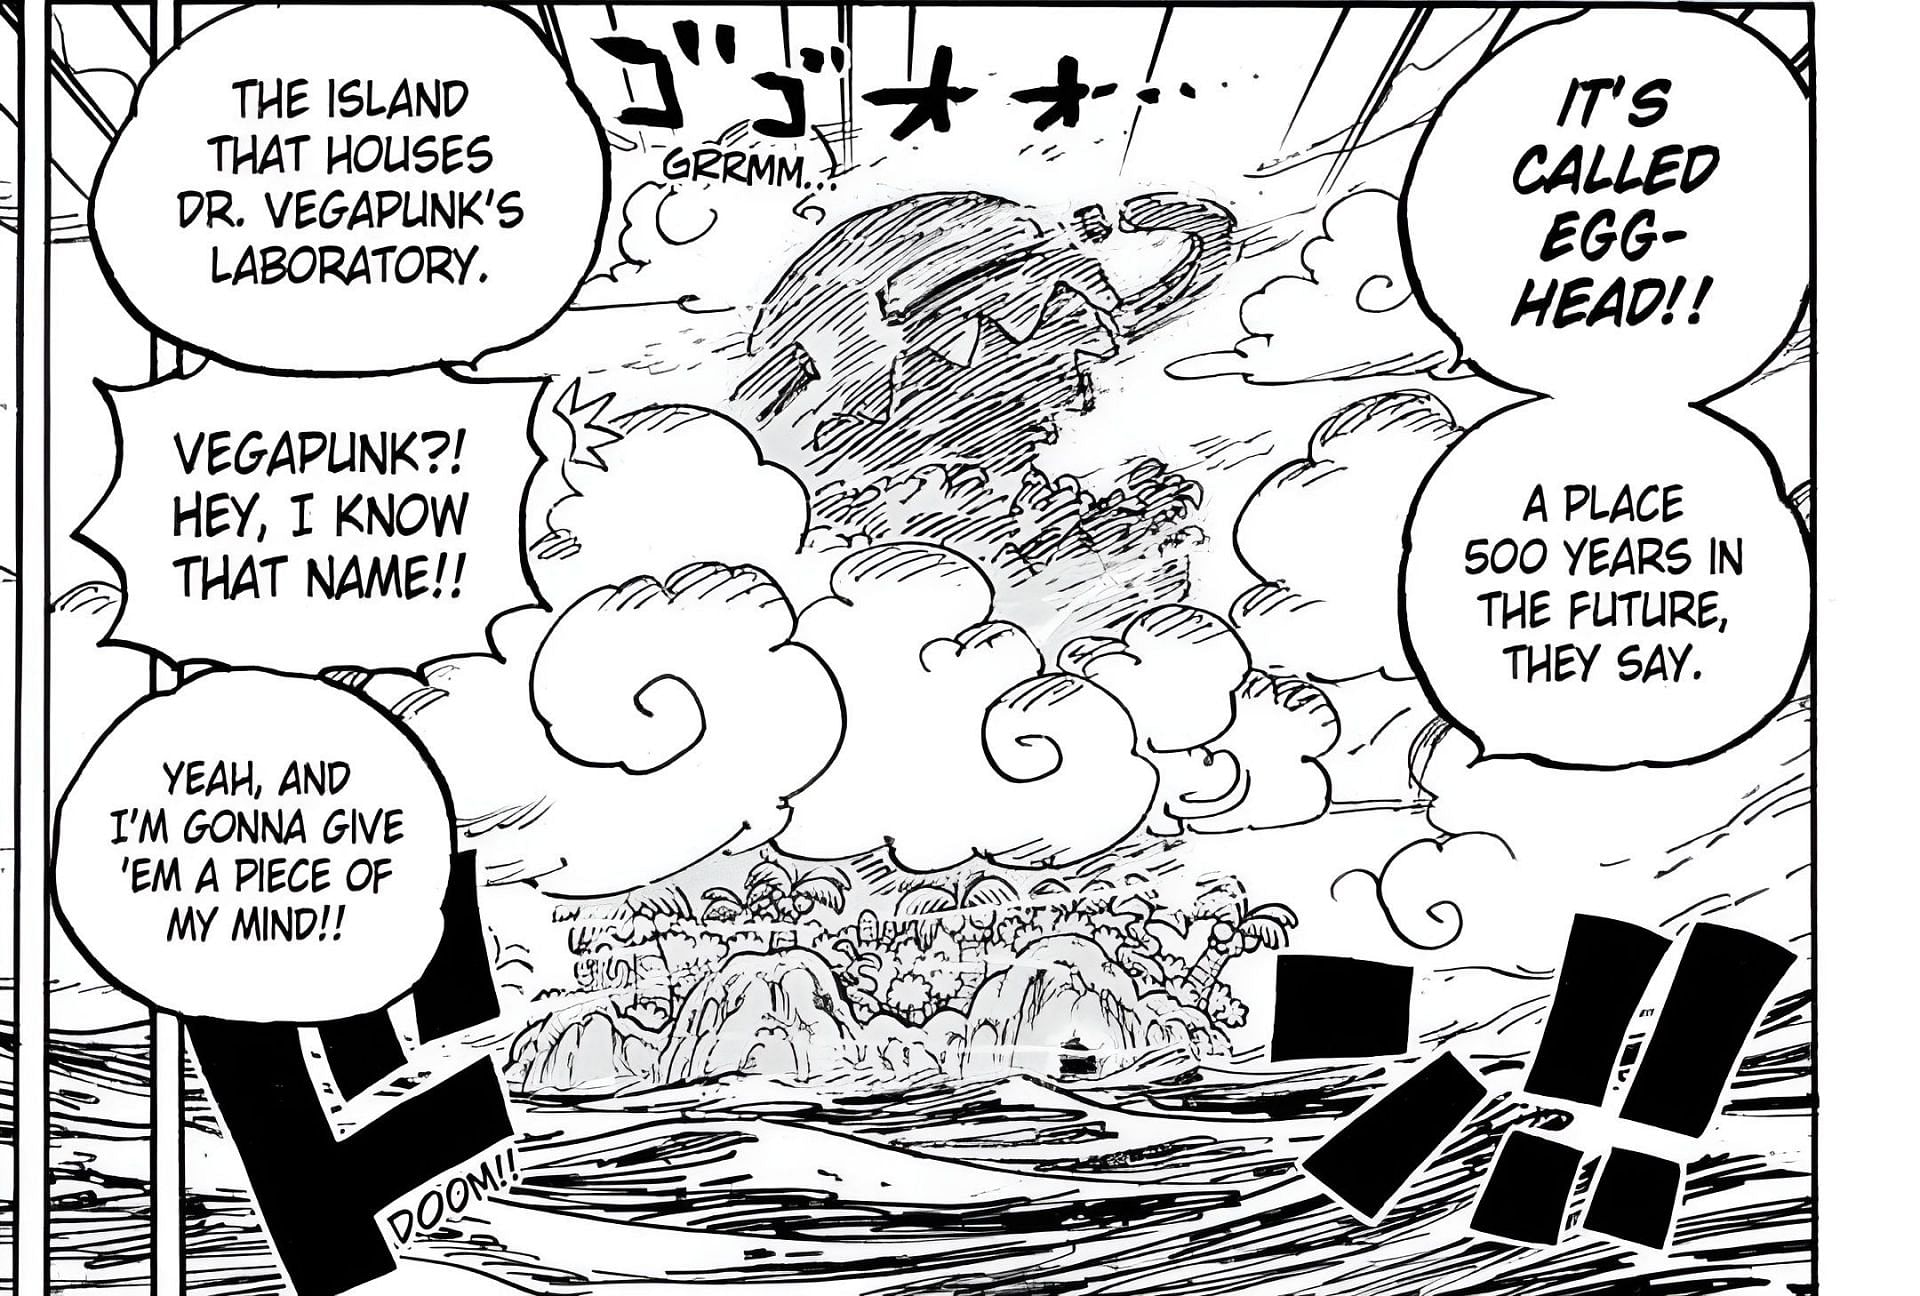 One Piece chapter 1062 is expected to shed more light on Vegapunk (Image via Eiichiro Oda/Shueisha)